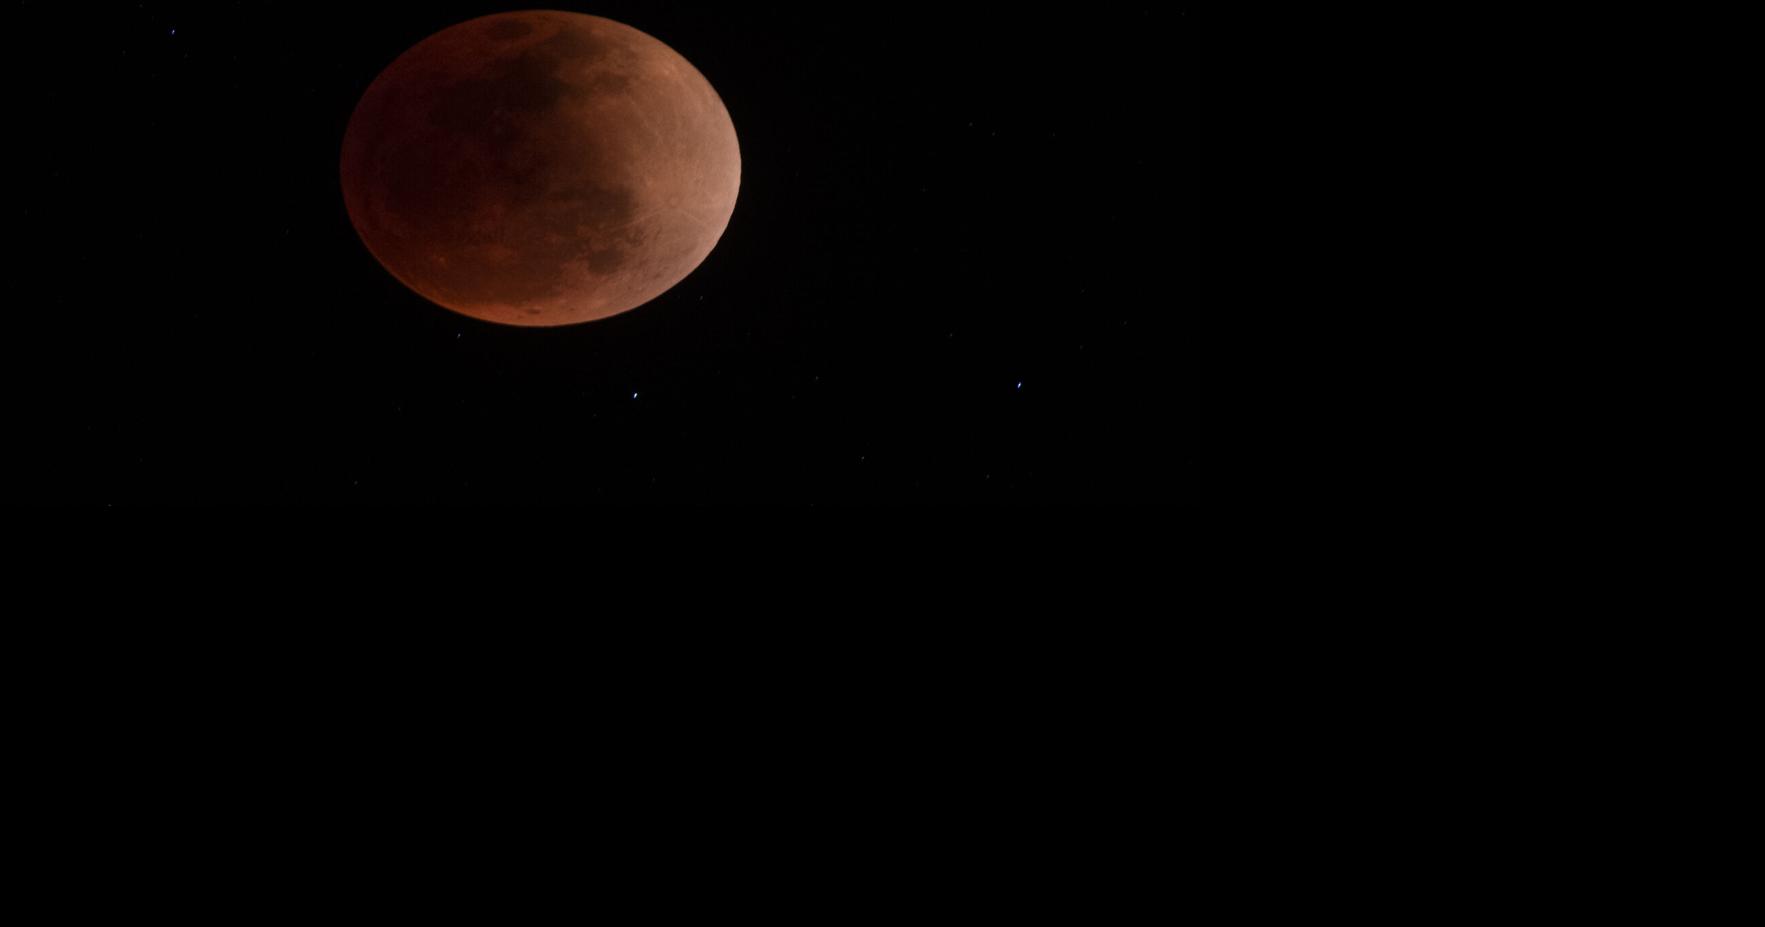 Skywatchers: Full moon, partial lunar eclipse to peak on Oct. 28